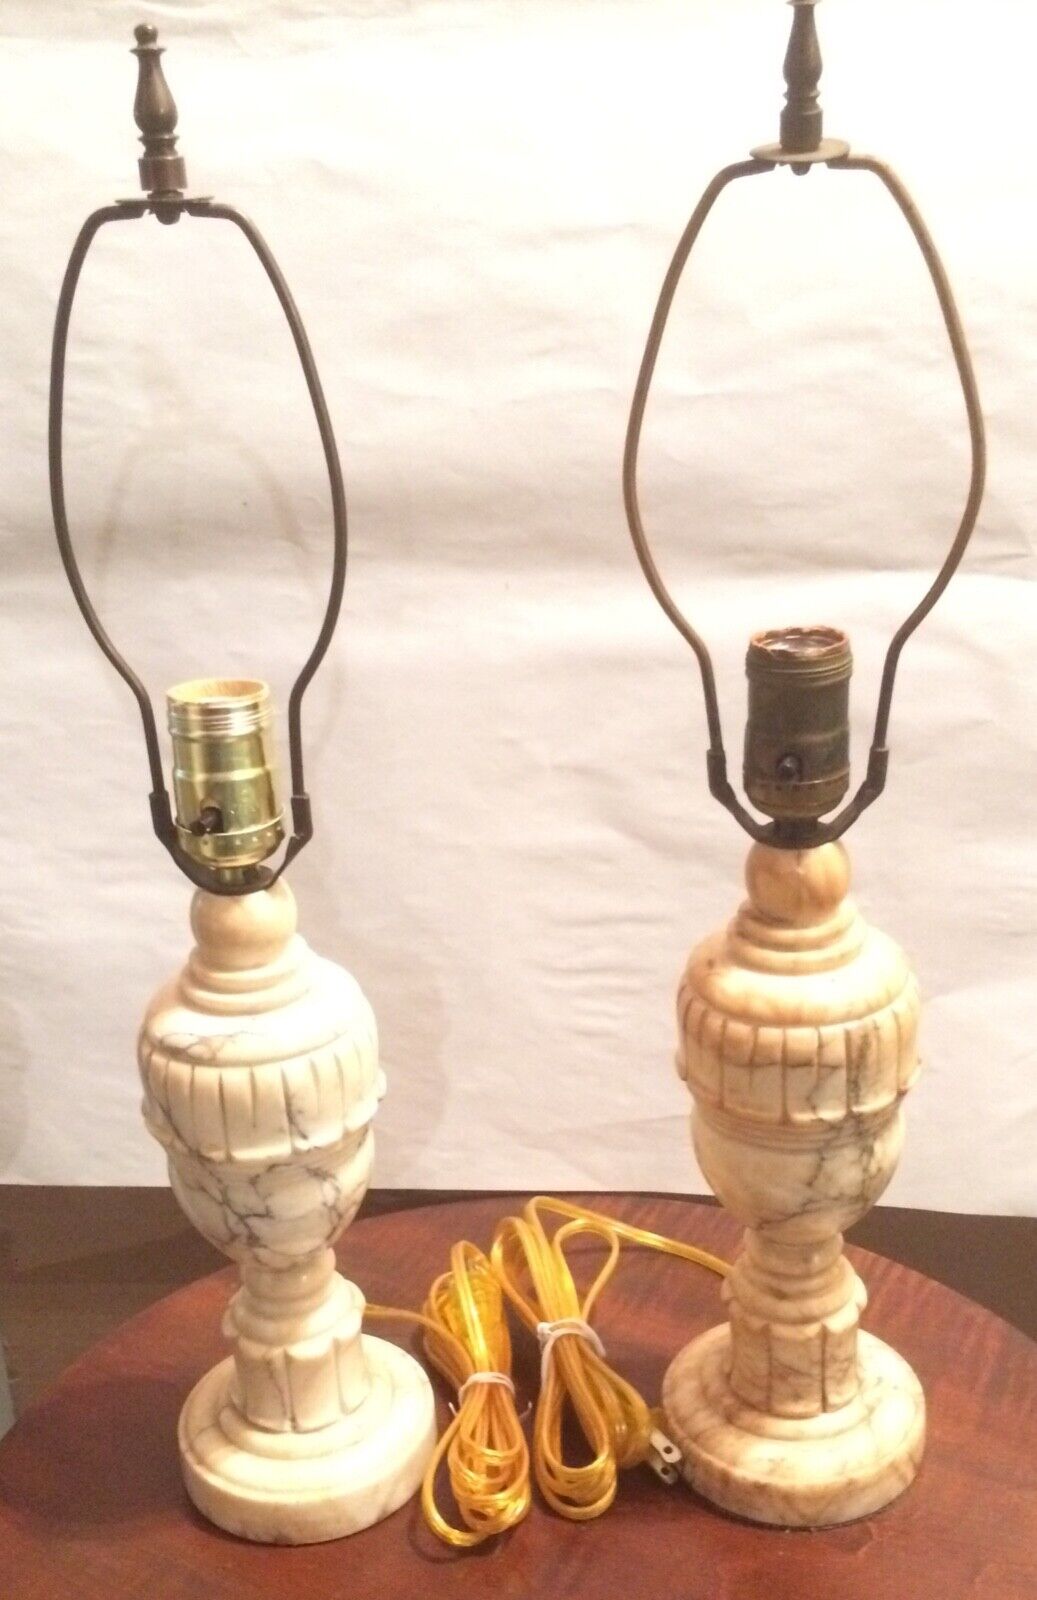 Small Vintage Mid-20th Century Pair Of Alabaster Table Lamps - Cleaned Rewired